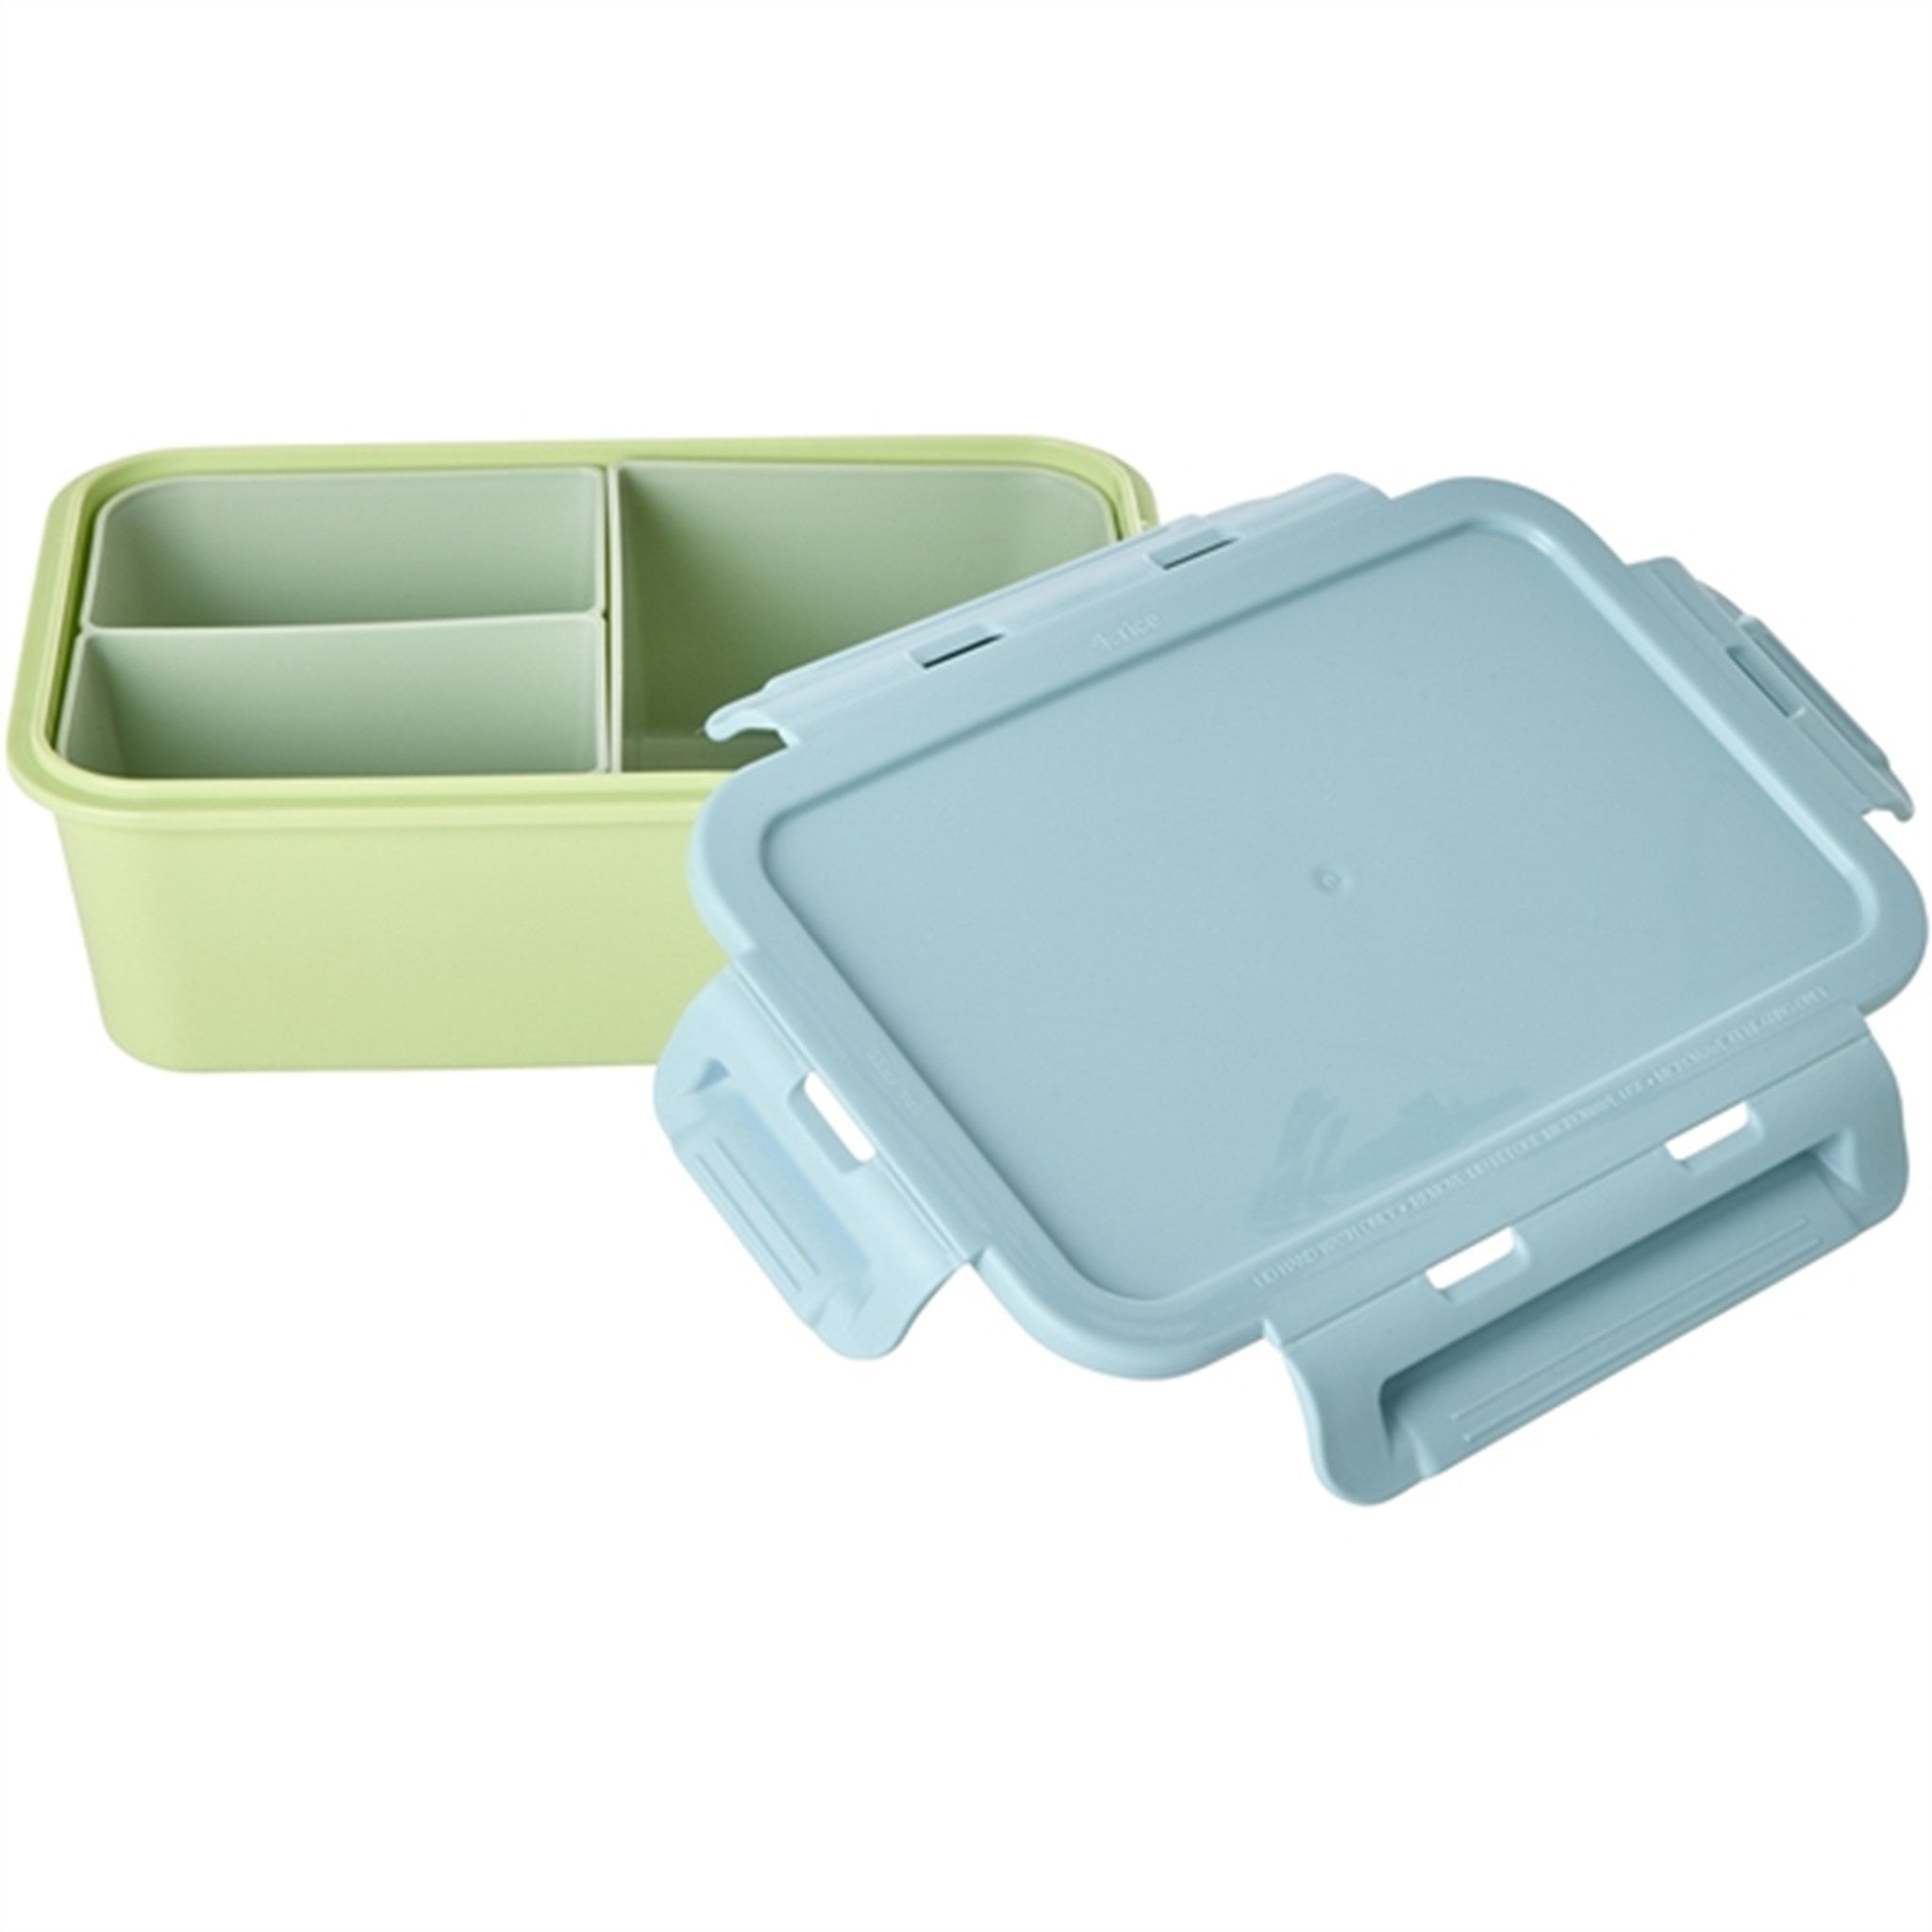 RICE Soft Green/Blue Lunchbox with 3 Inserts